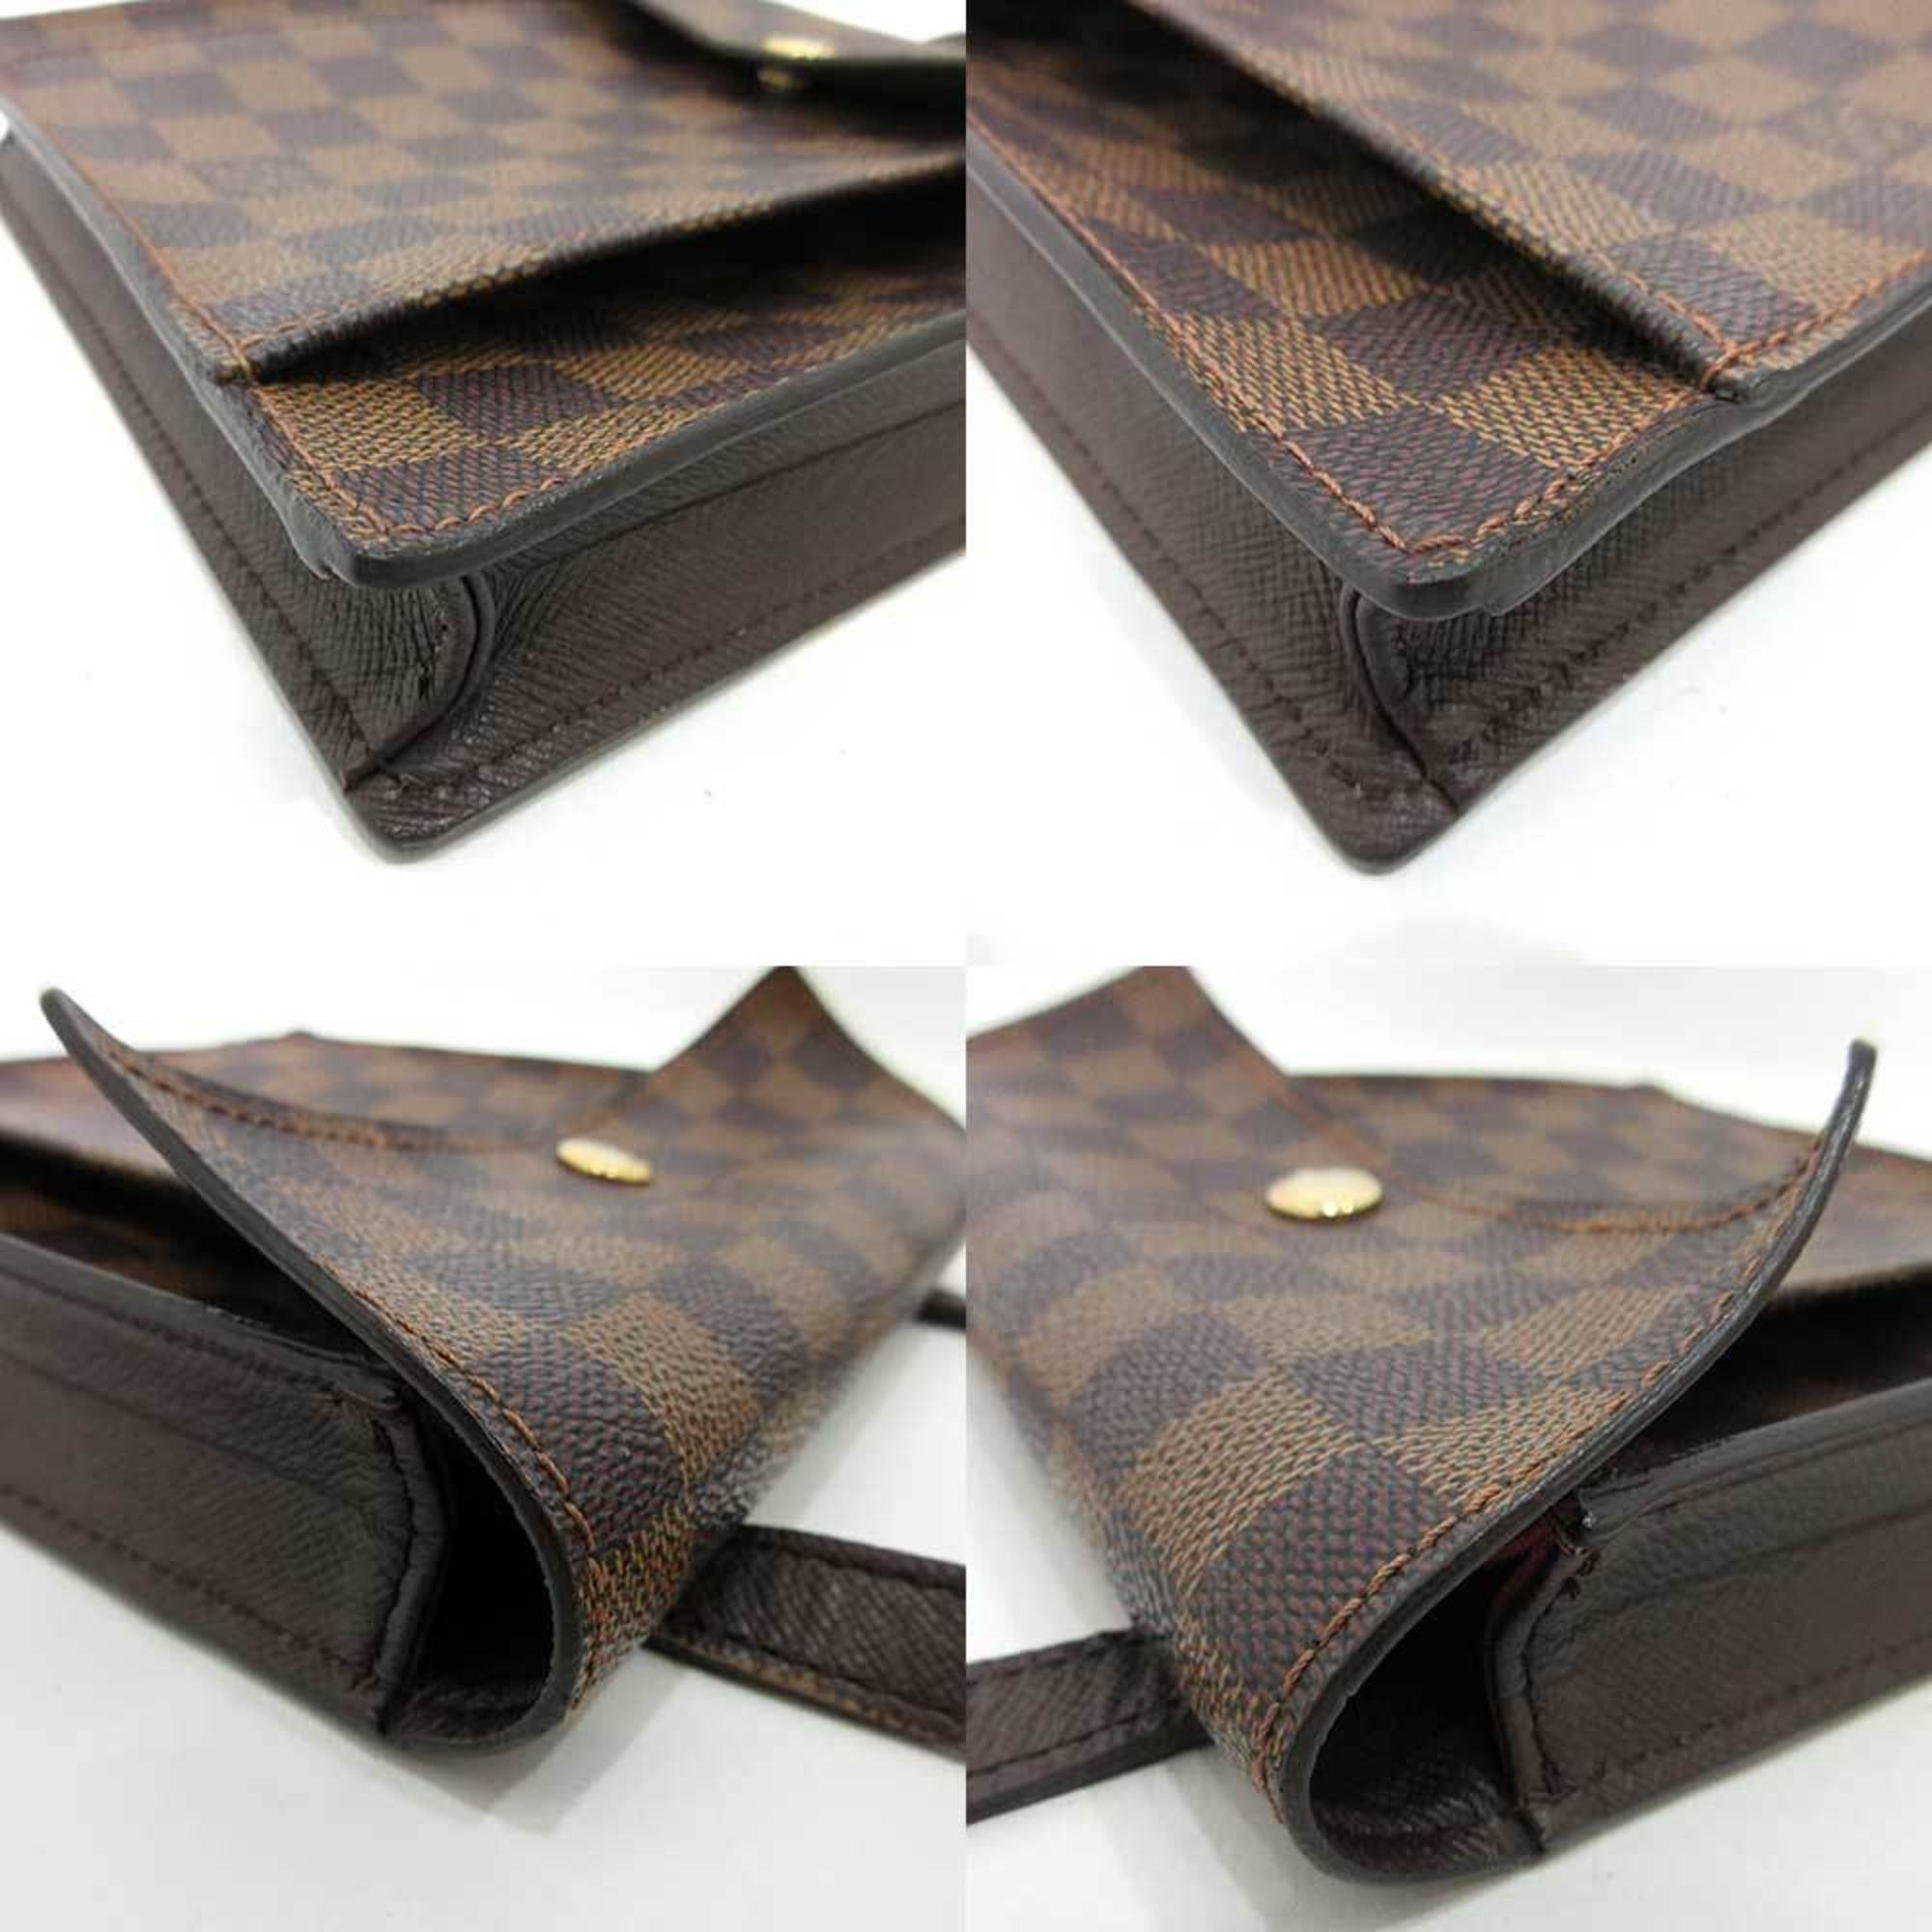 Buy LOUIS VUITTON Louis Vuitton M61725 USA-made monogram pochette Porto  Monecredi long wallet brown [pre-owned] from Japan - Buy authentic Plus  exclusive items from Japan